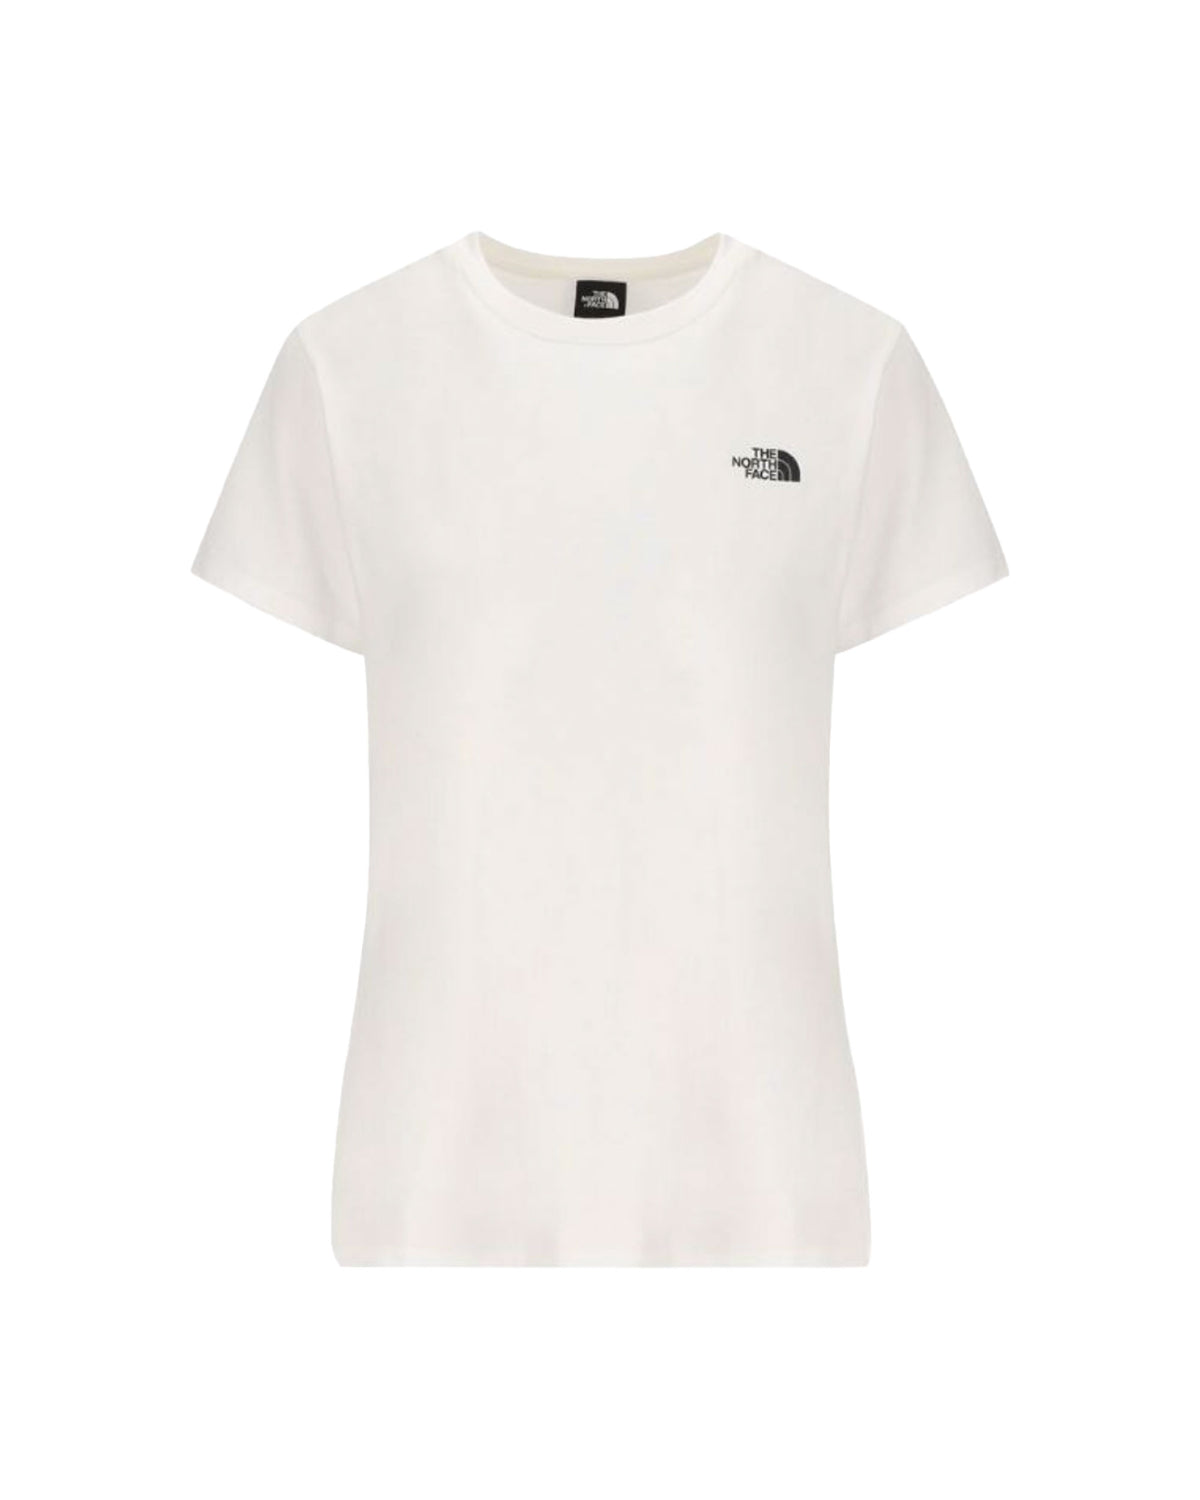 Woman's Tee The North Face Simple Dome White